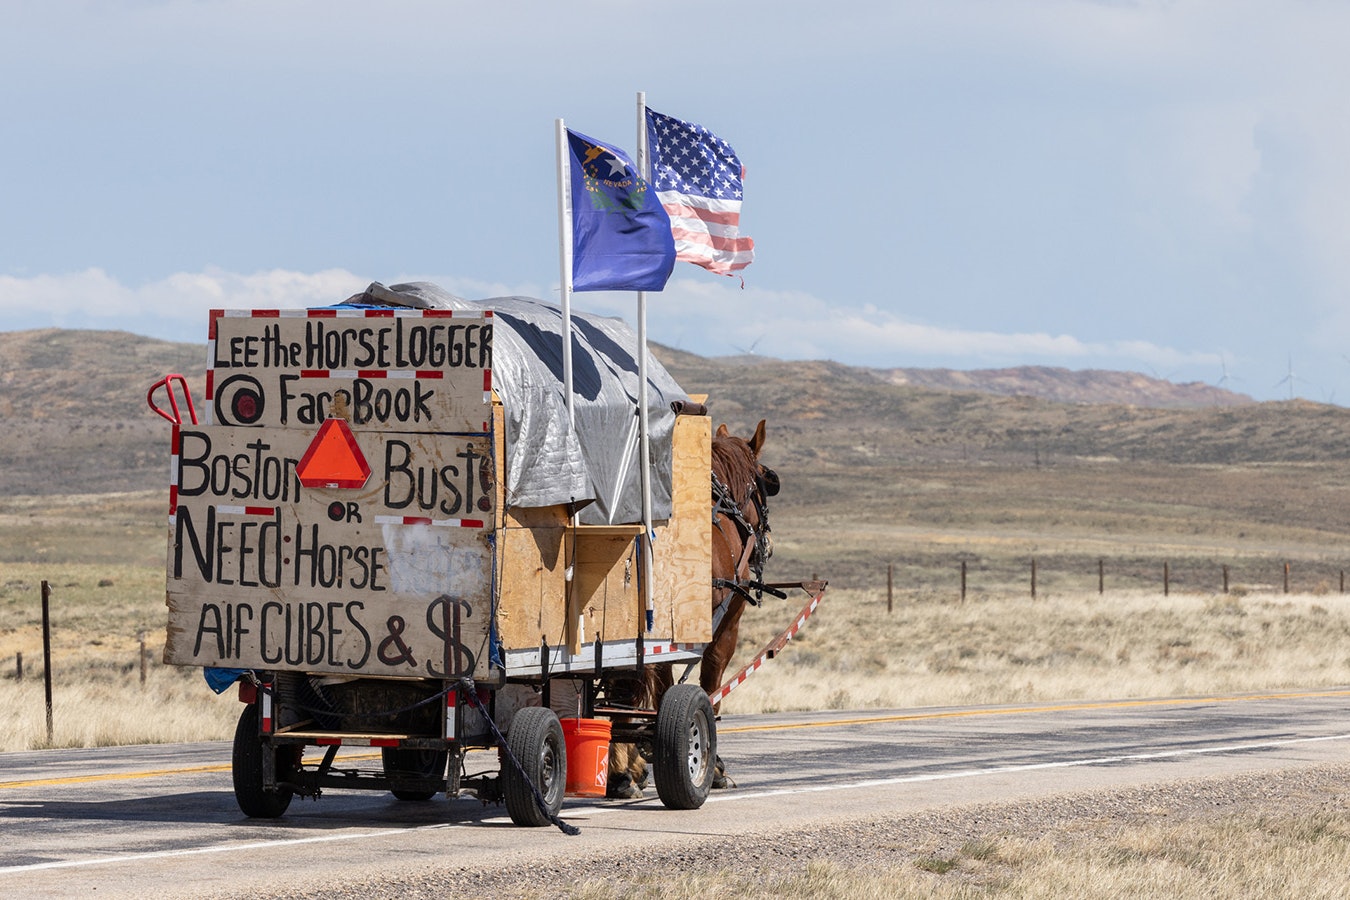 A man known as Lee The Horselogger was in Wyoming this week on a cross-country journey by horse-drawn wagon with an ultimate destination of Boston. He explained to Cowboy State Daily that he likes huge draft horses better than “little horses.”